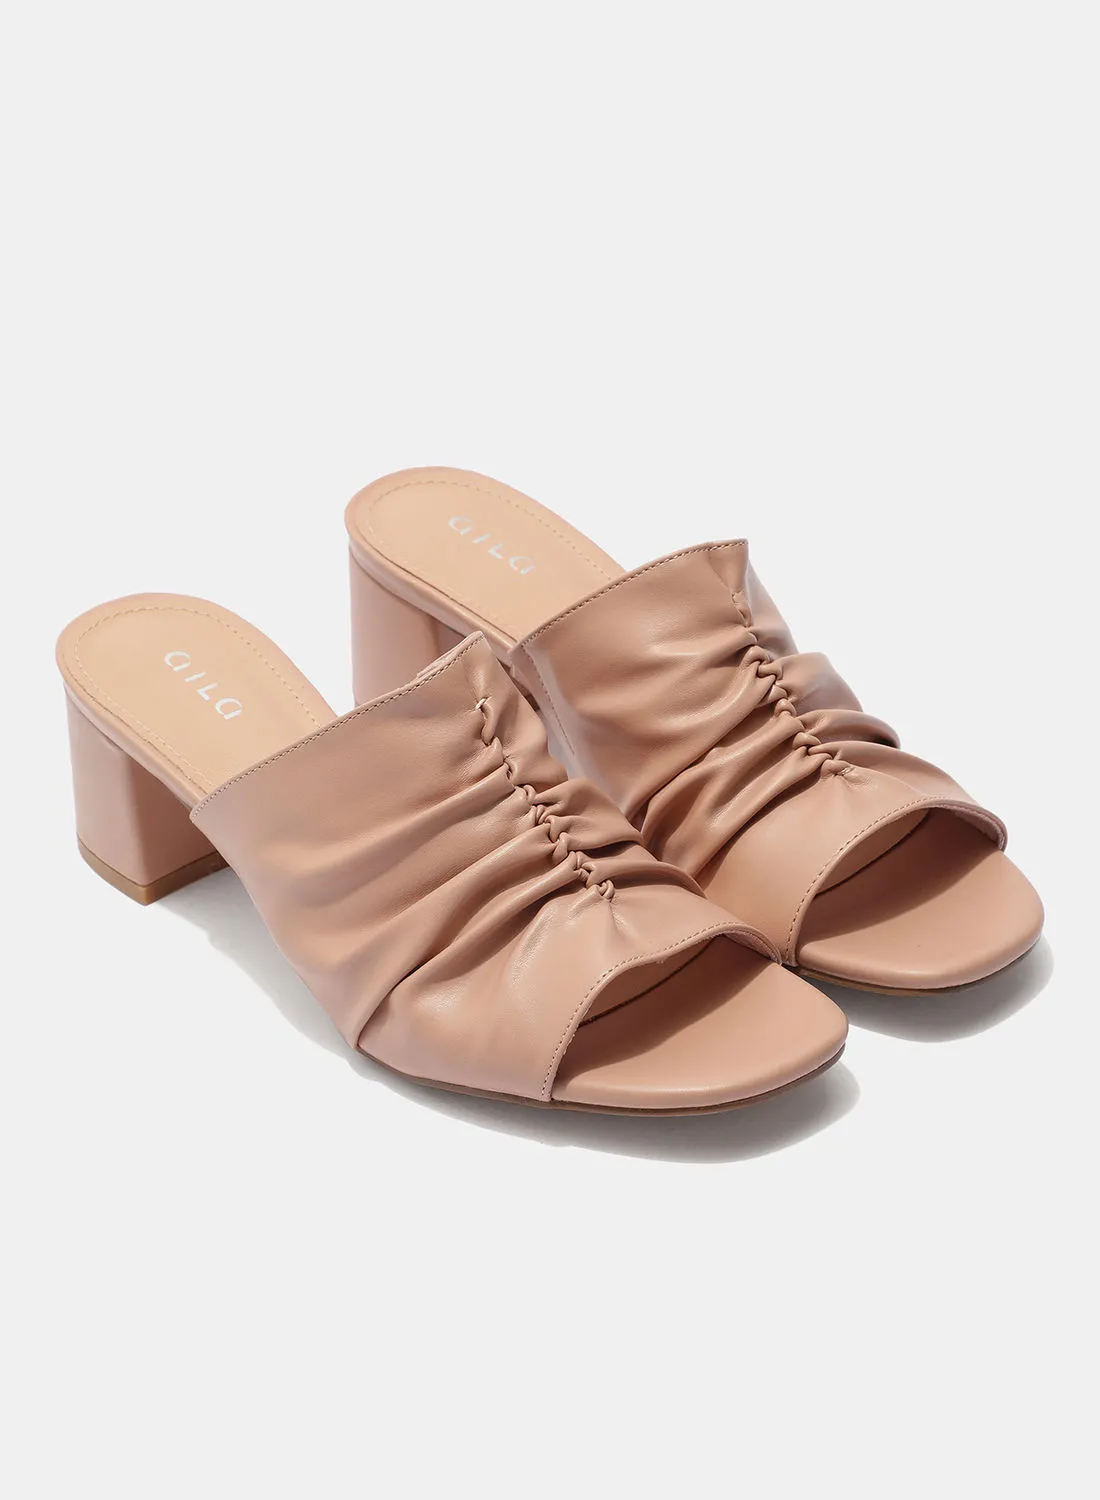 Aila Open Toe Heeled Sandals Nude Pink